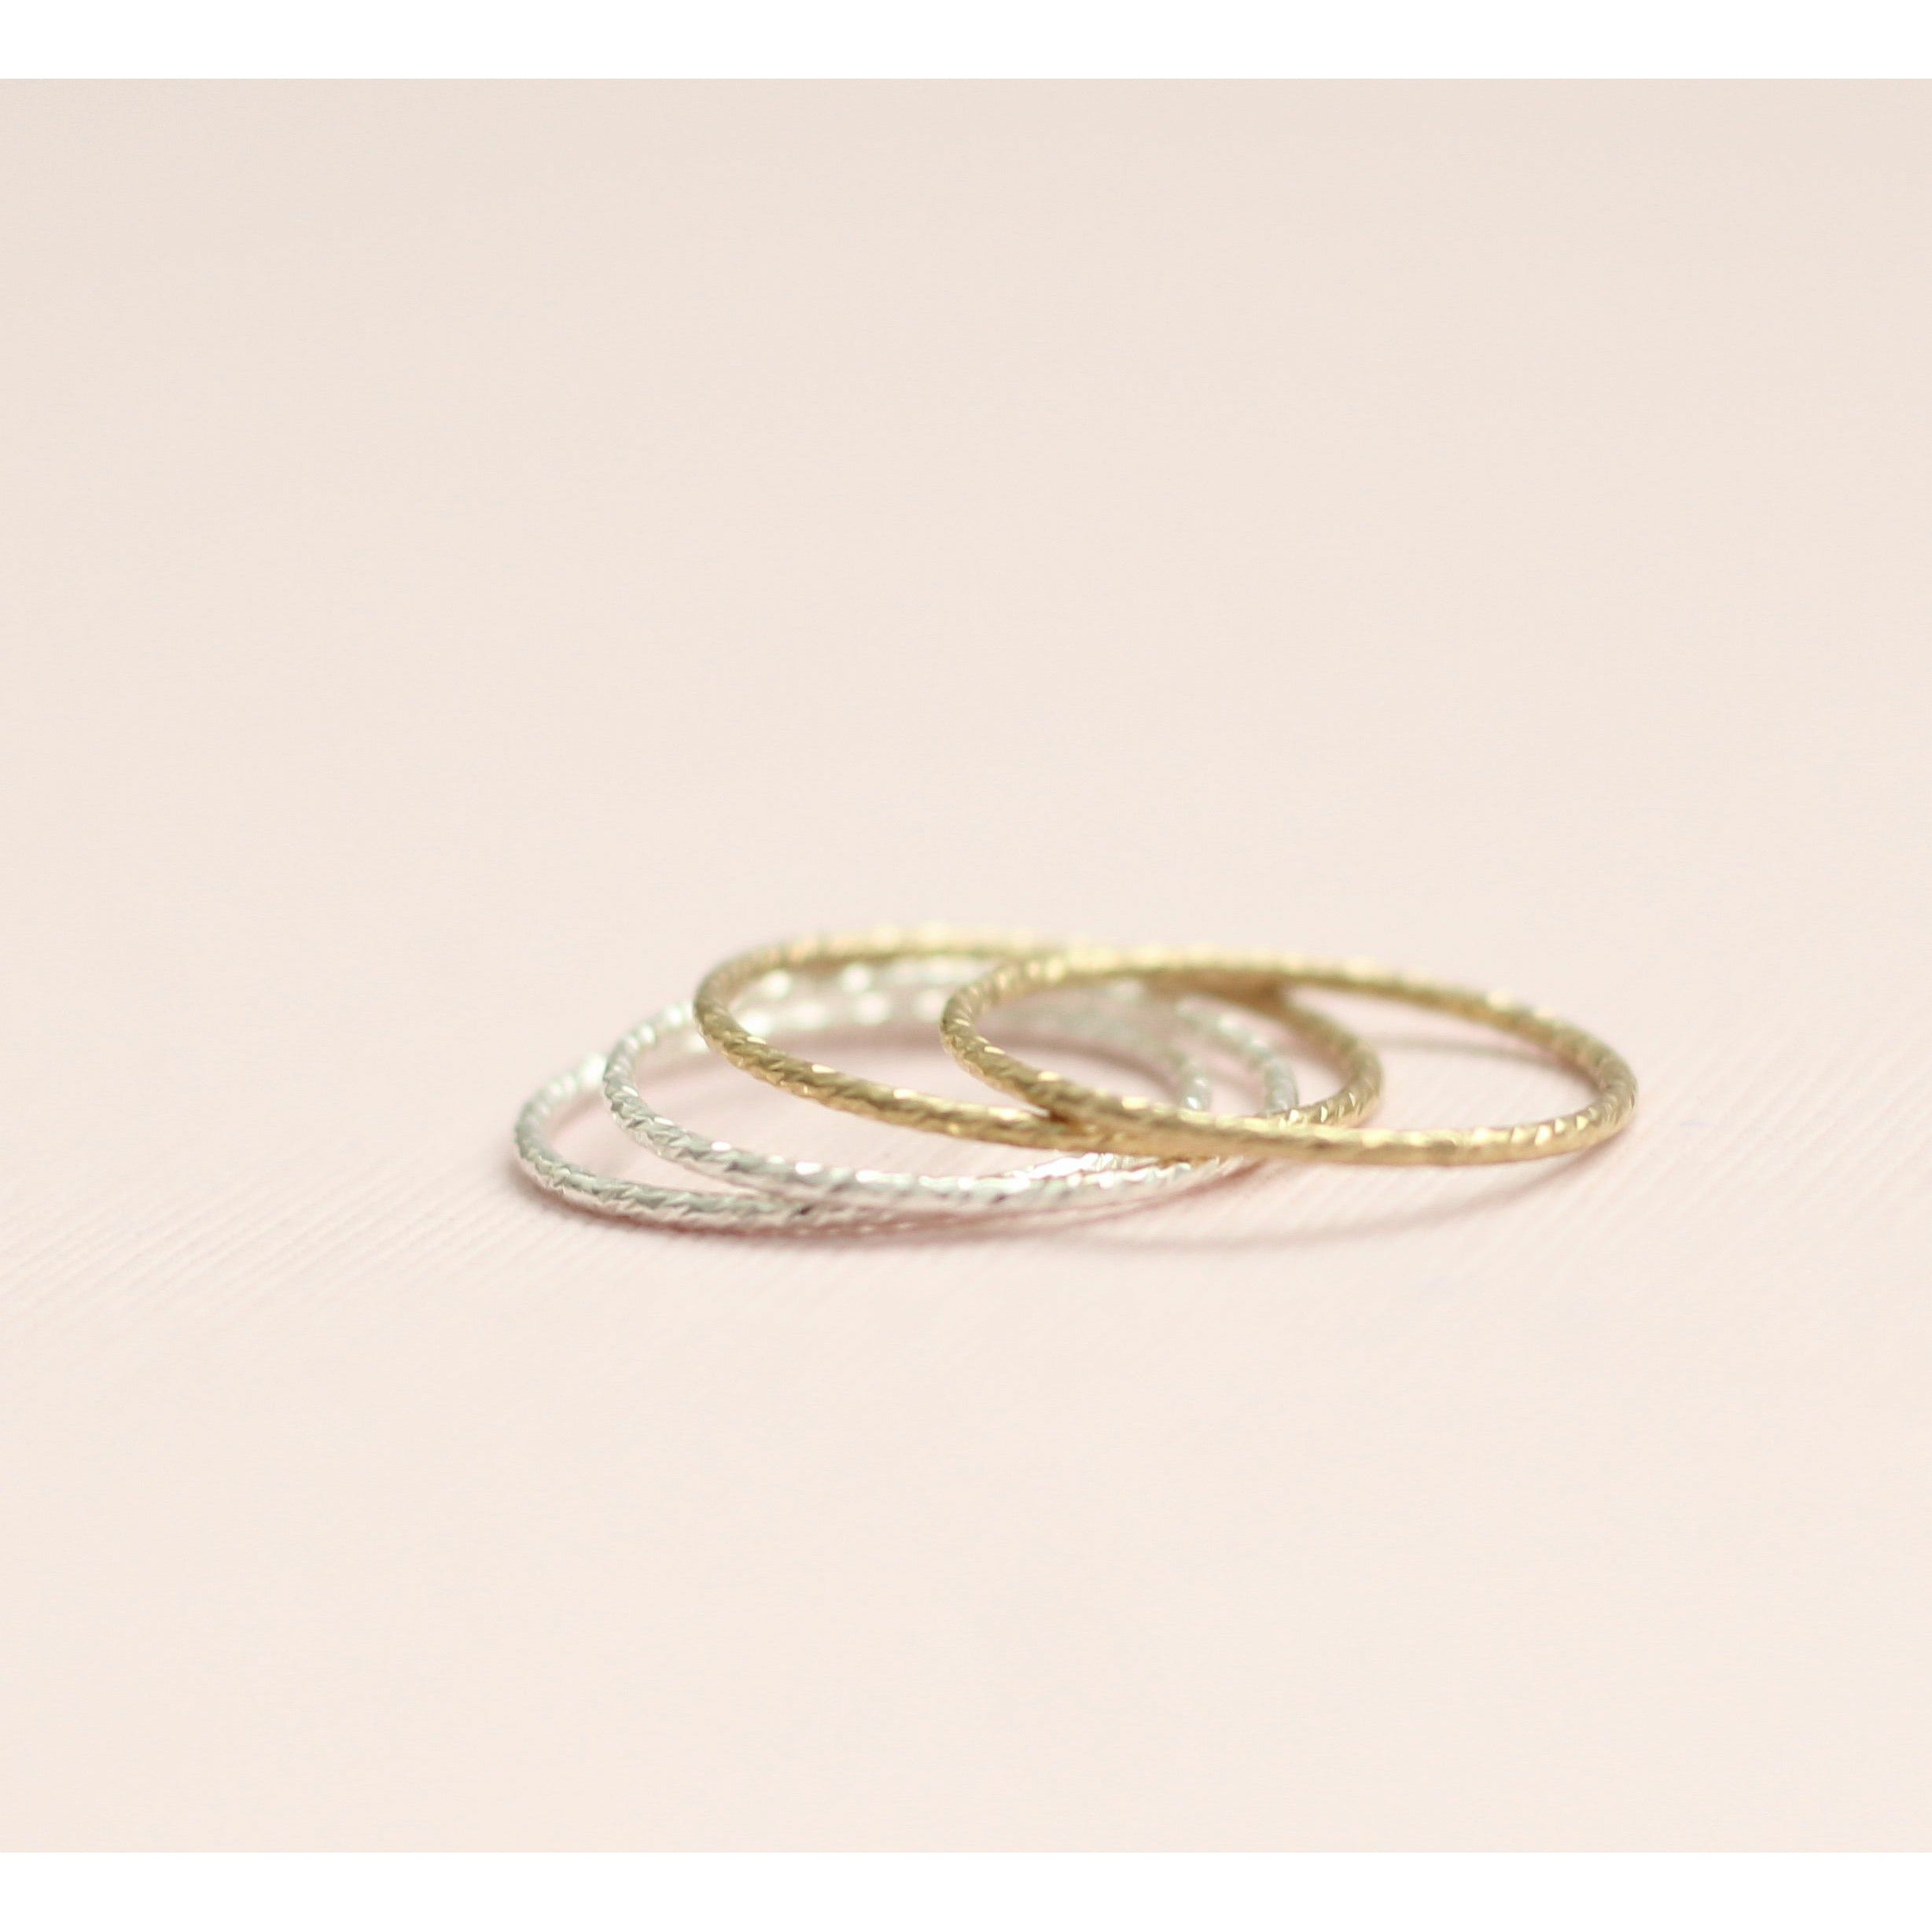 Minimal Sparkle stackable rings handmade in Canada 